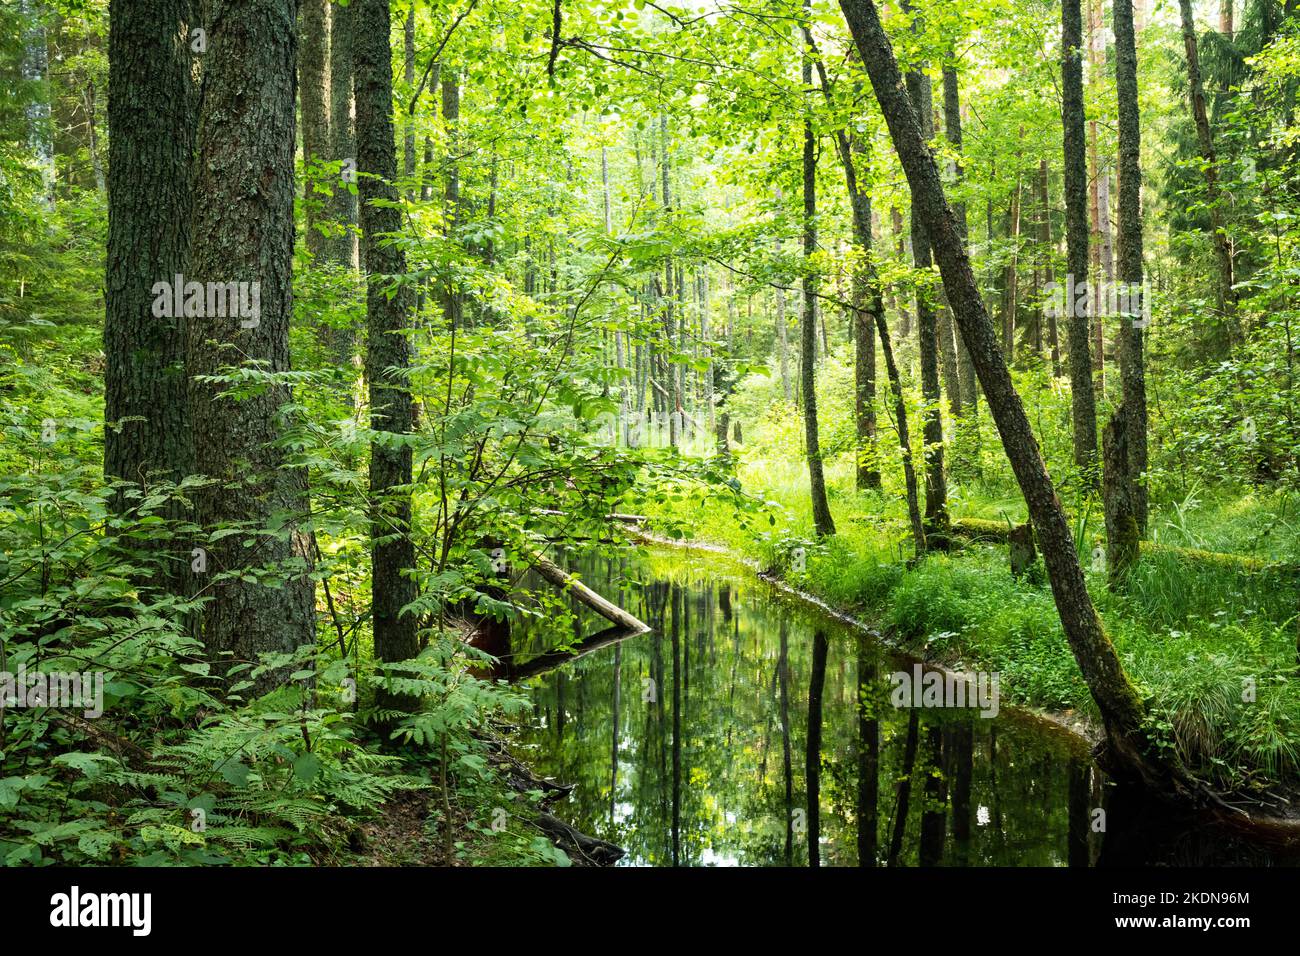 A view to summery Toonoja river surrounded with lush vegetation in Soomaa National Park, Estonia. Stock Photo